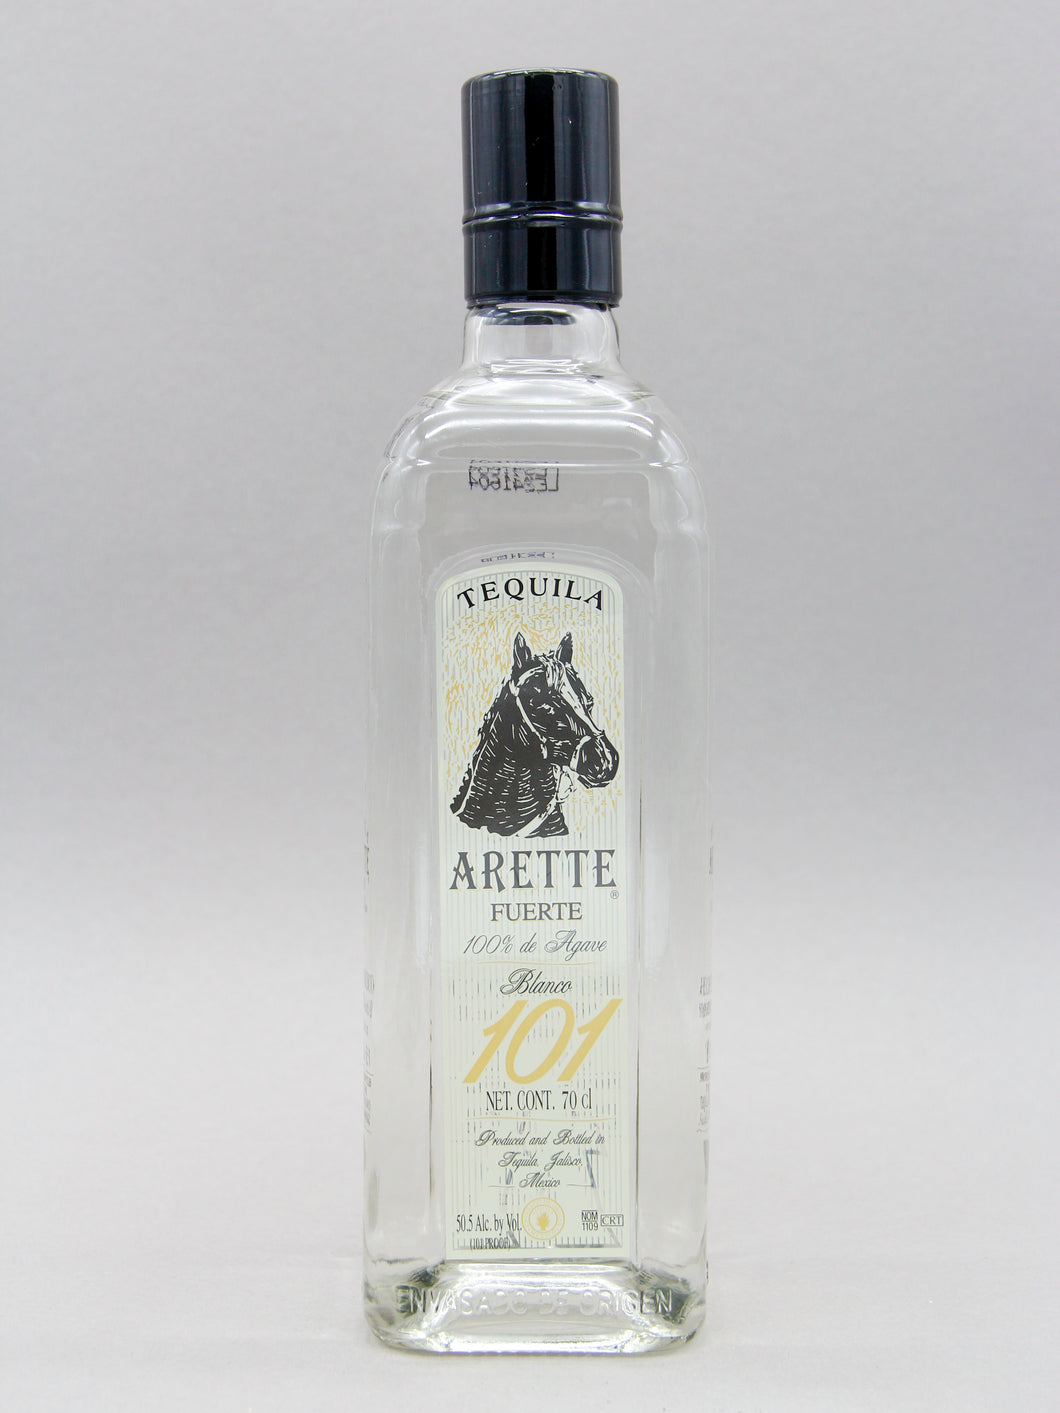 Arette Fuerte Blanco Tequila 100% Agave (50.5%, 70cl)